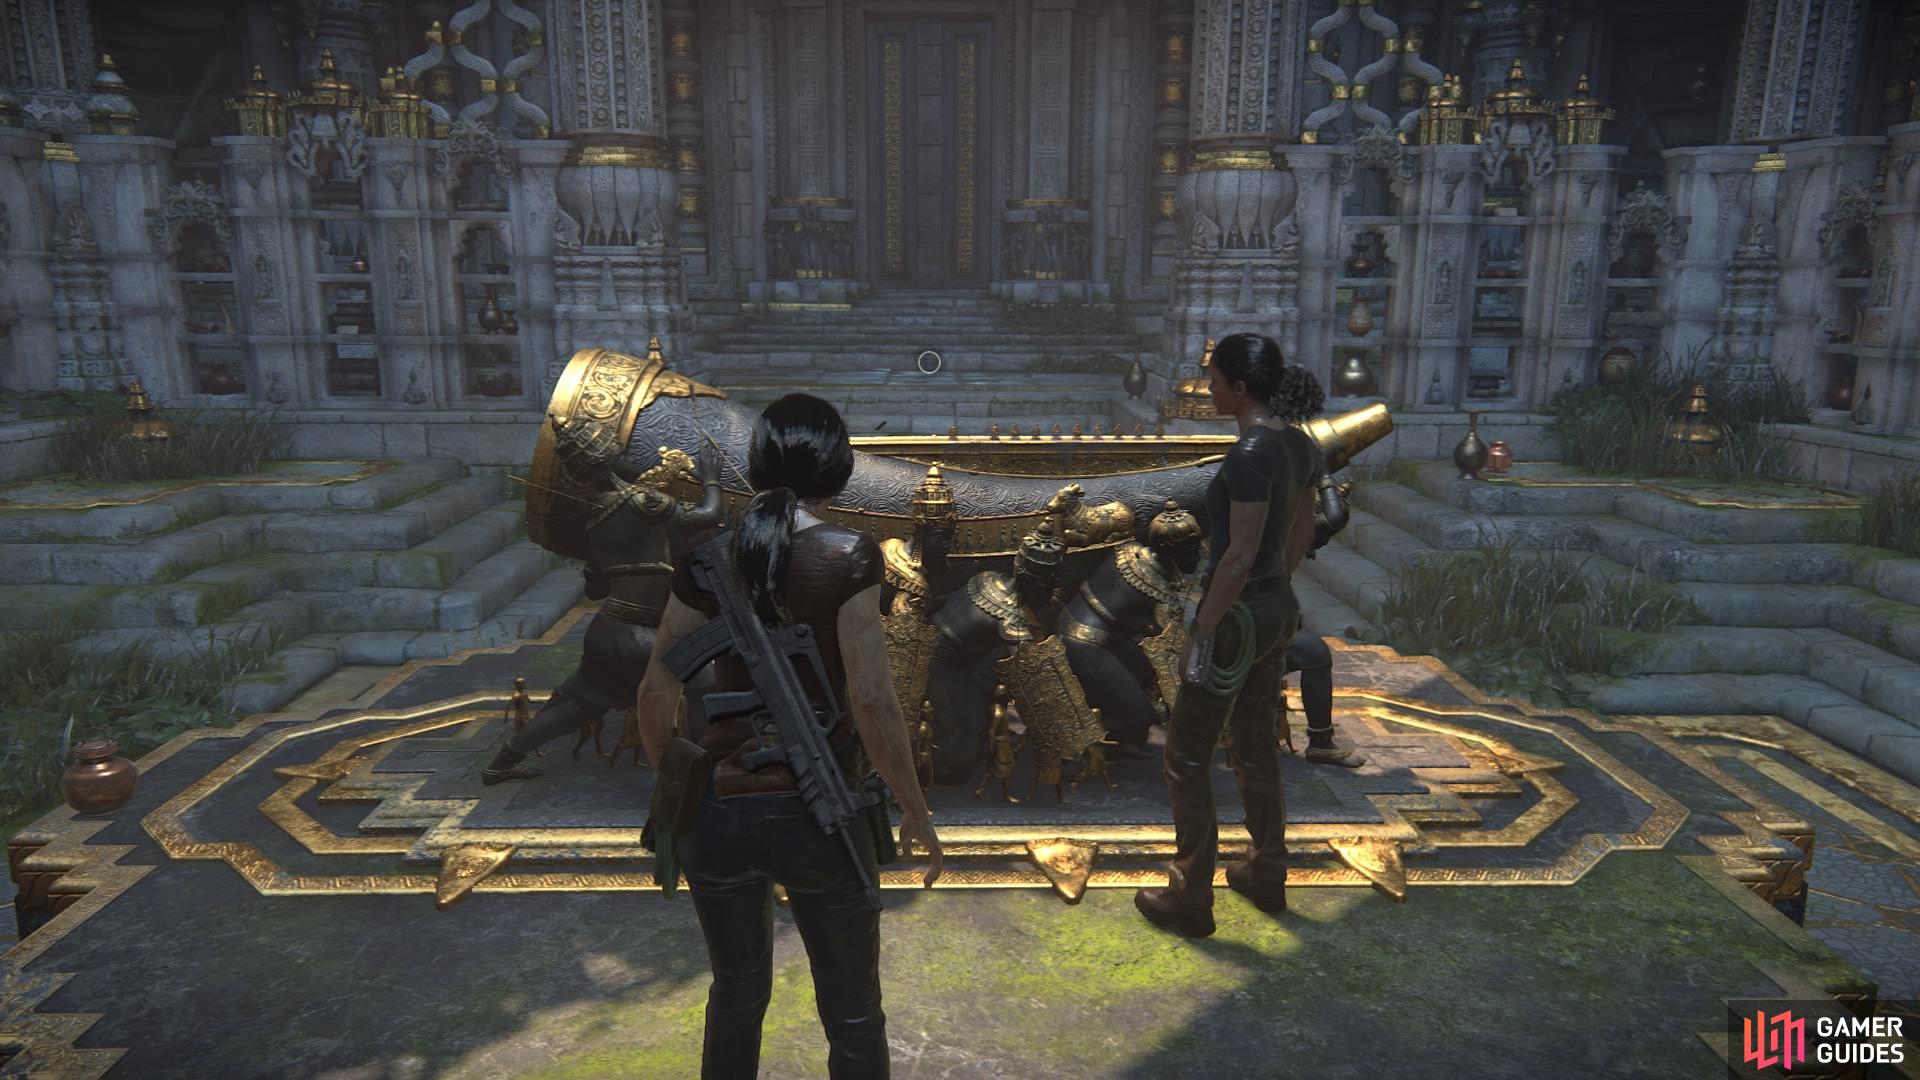 Inspect the alter to activate the cutscene